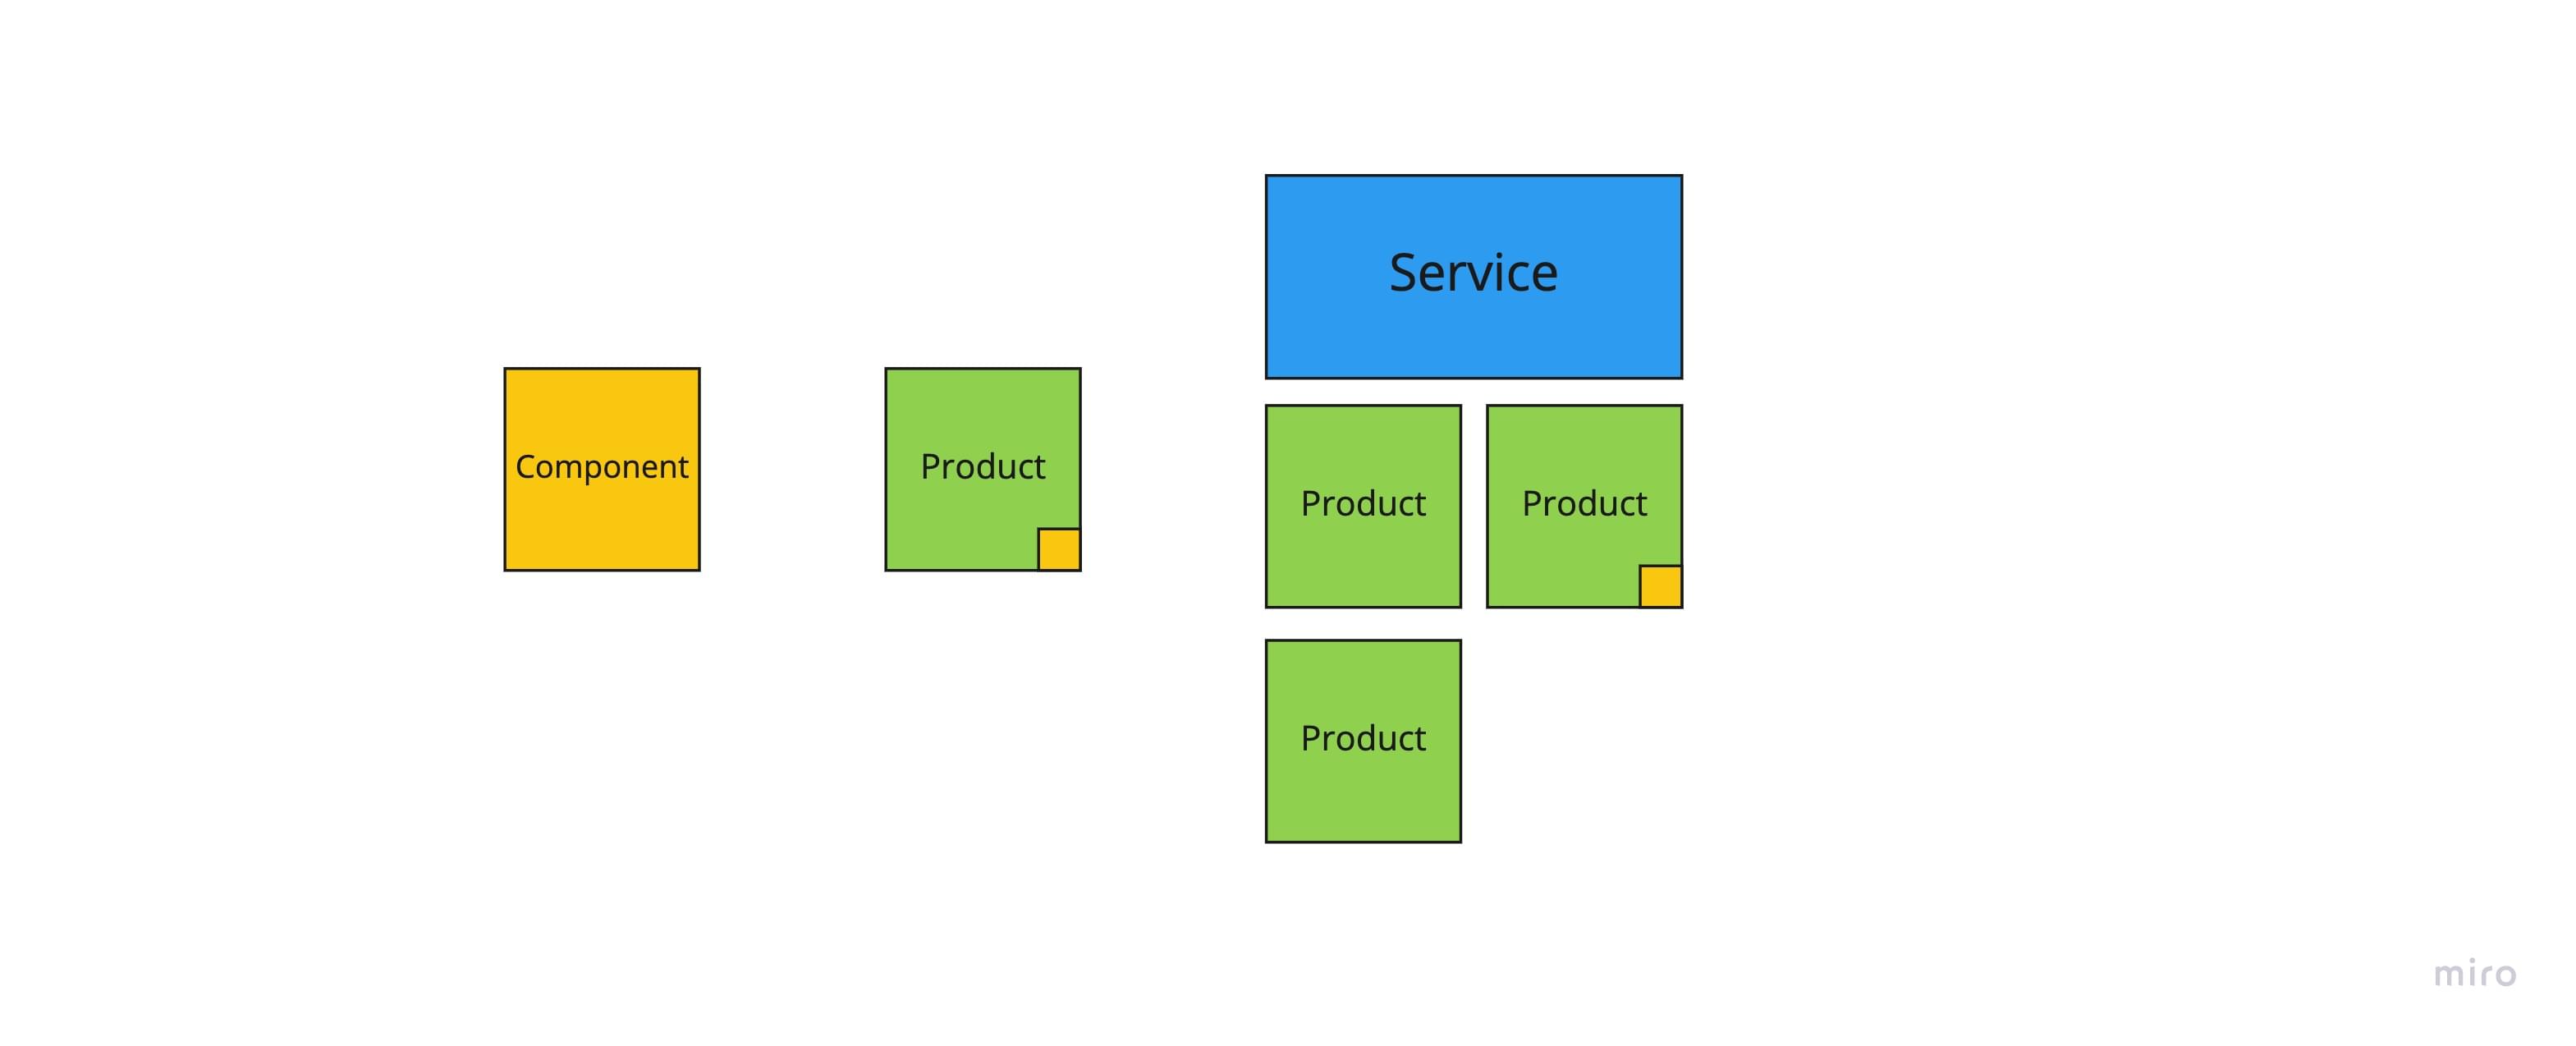 omponent, Product and Service diagram